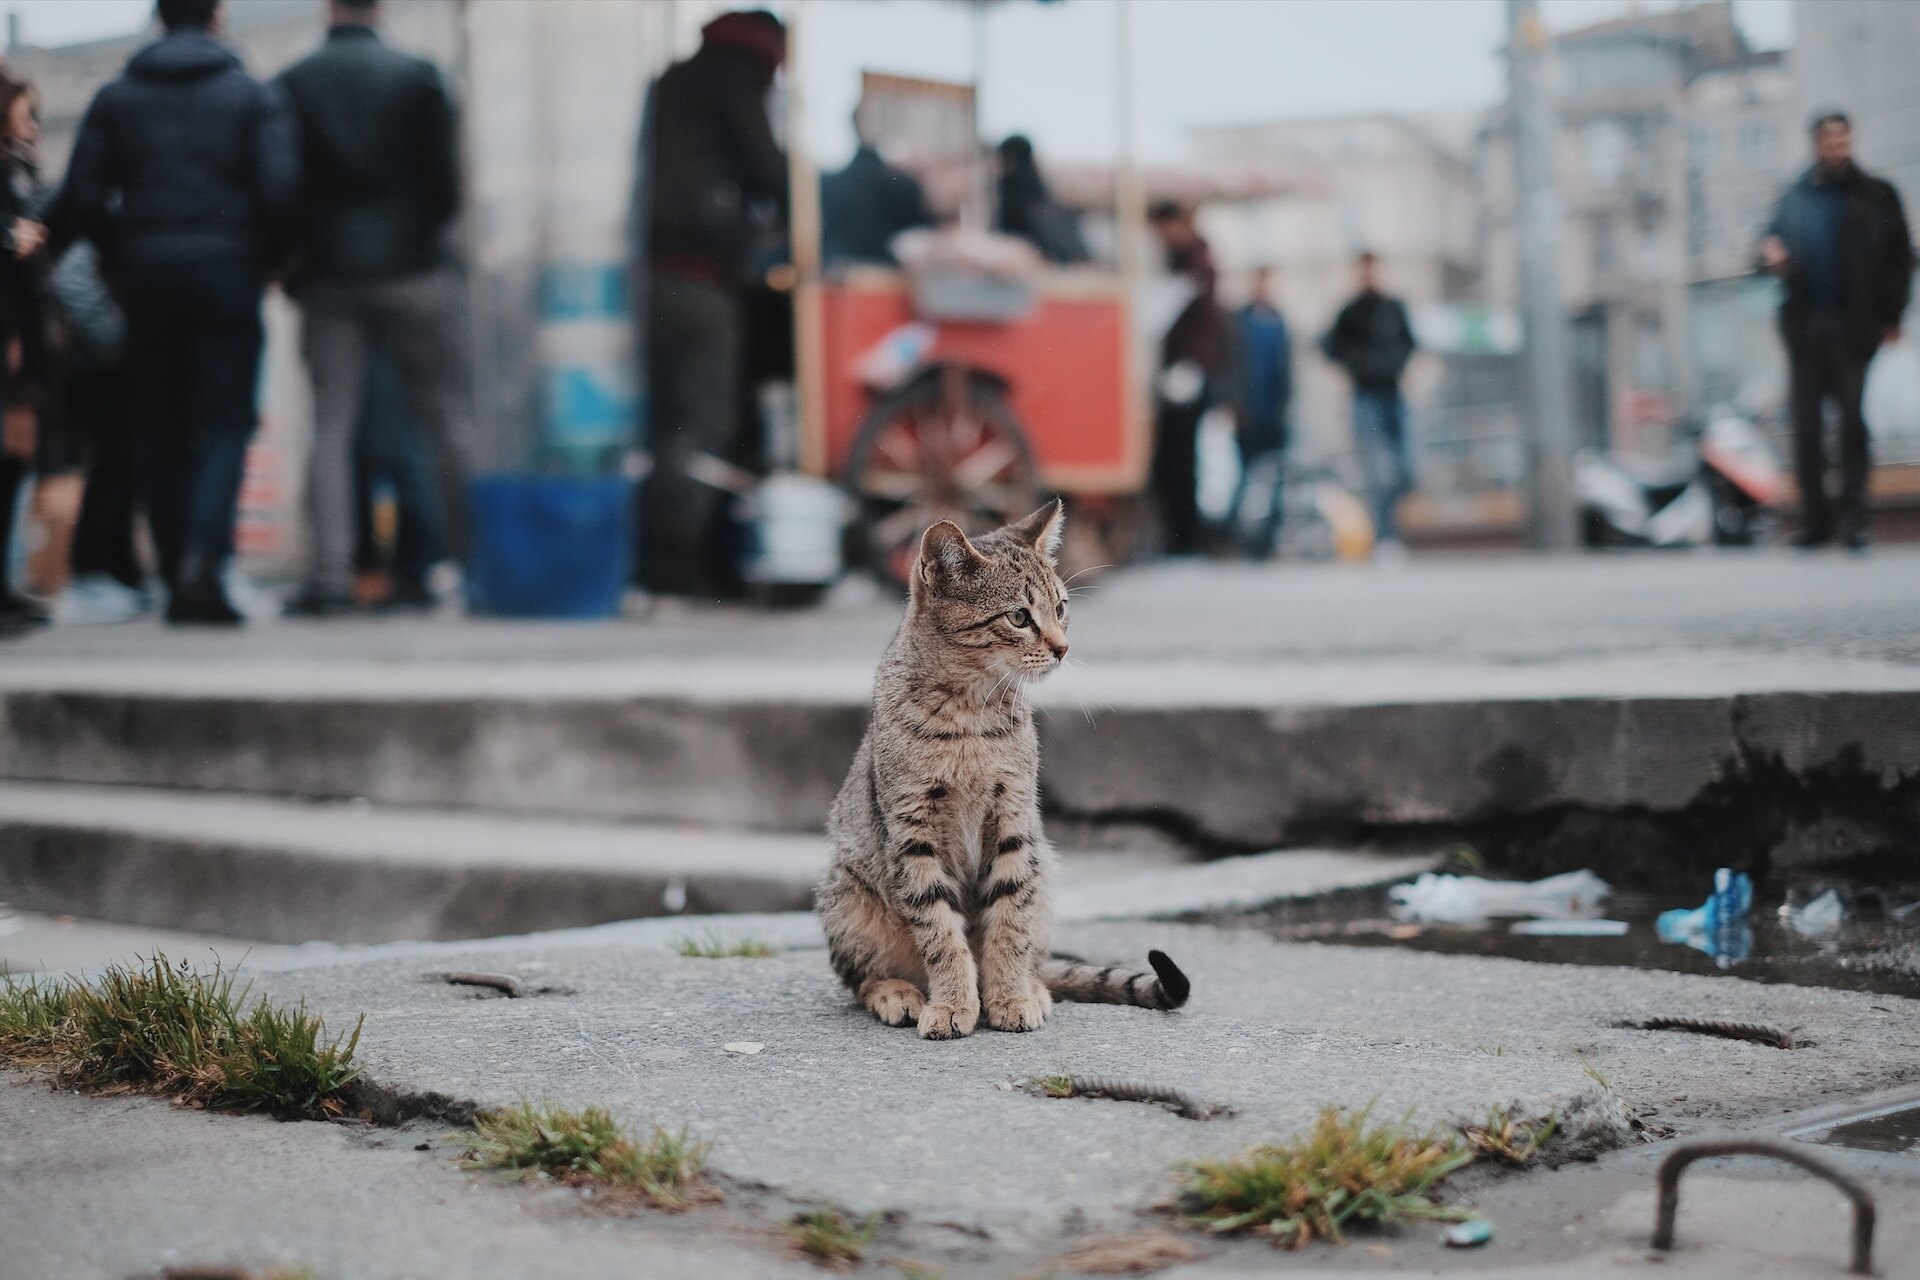 A cat sitting alone on a city pavement surrounded by people